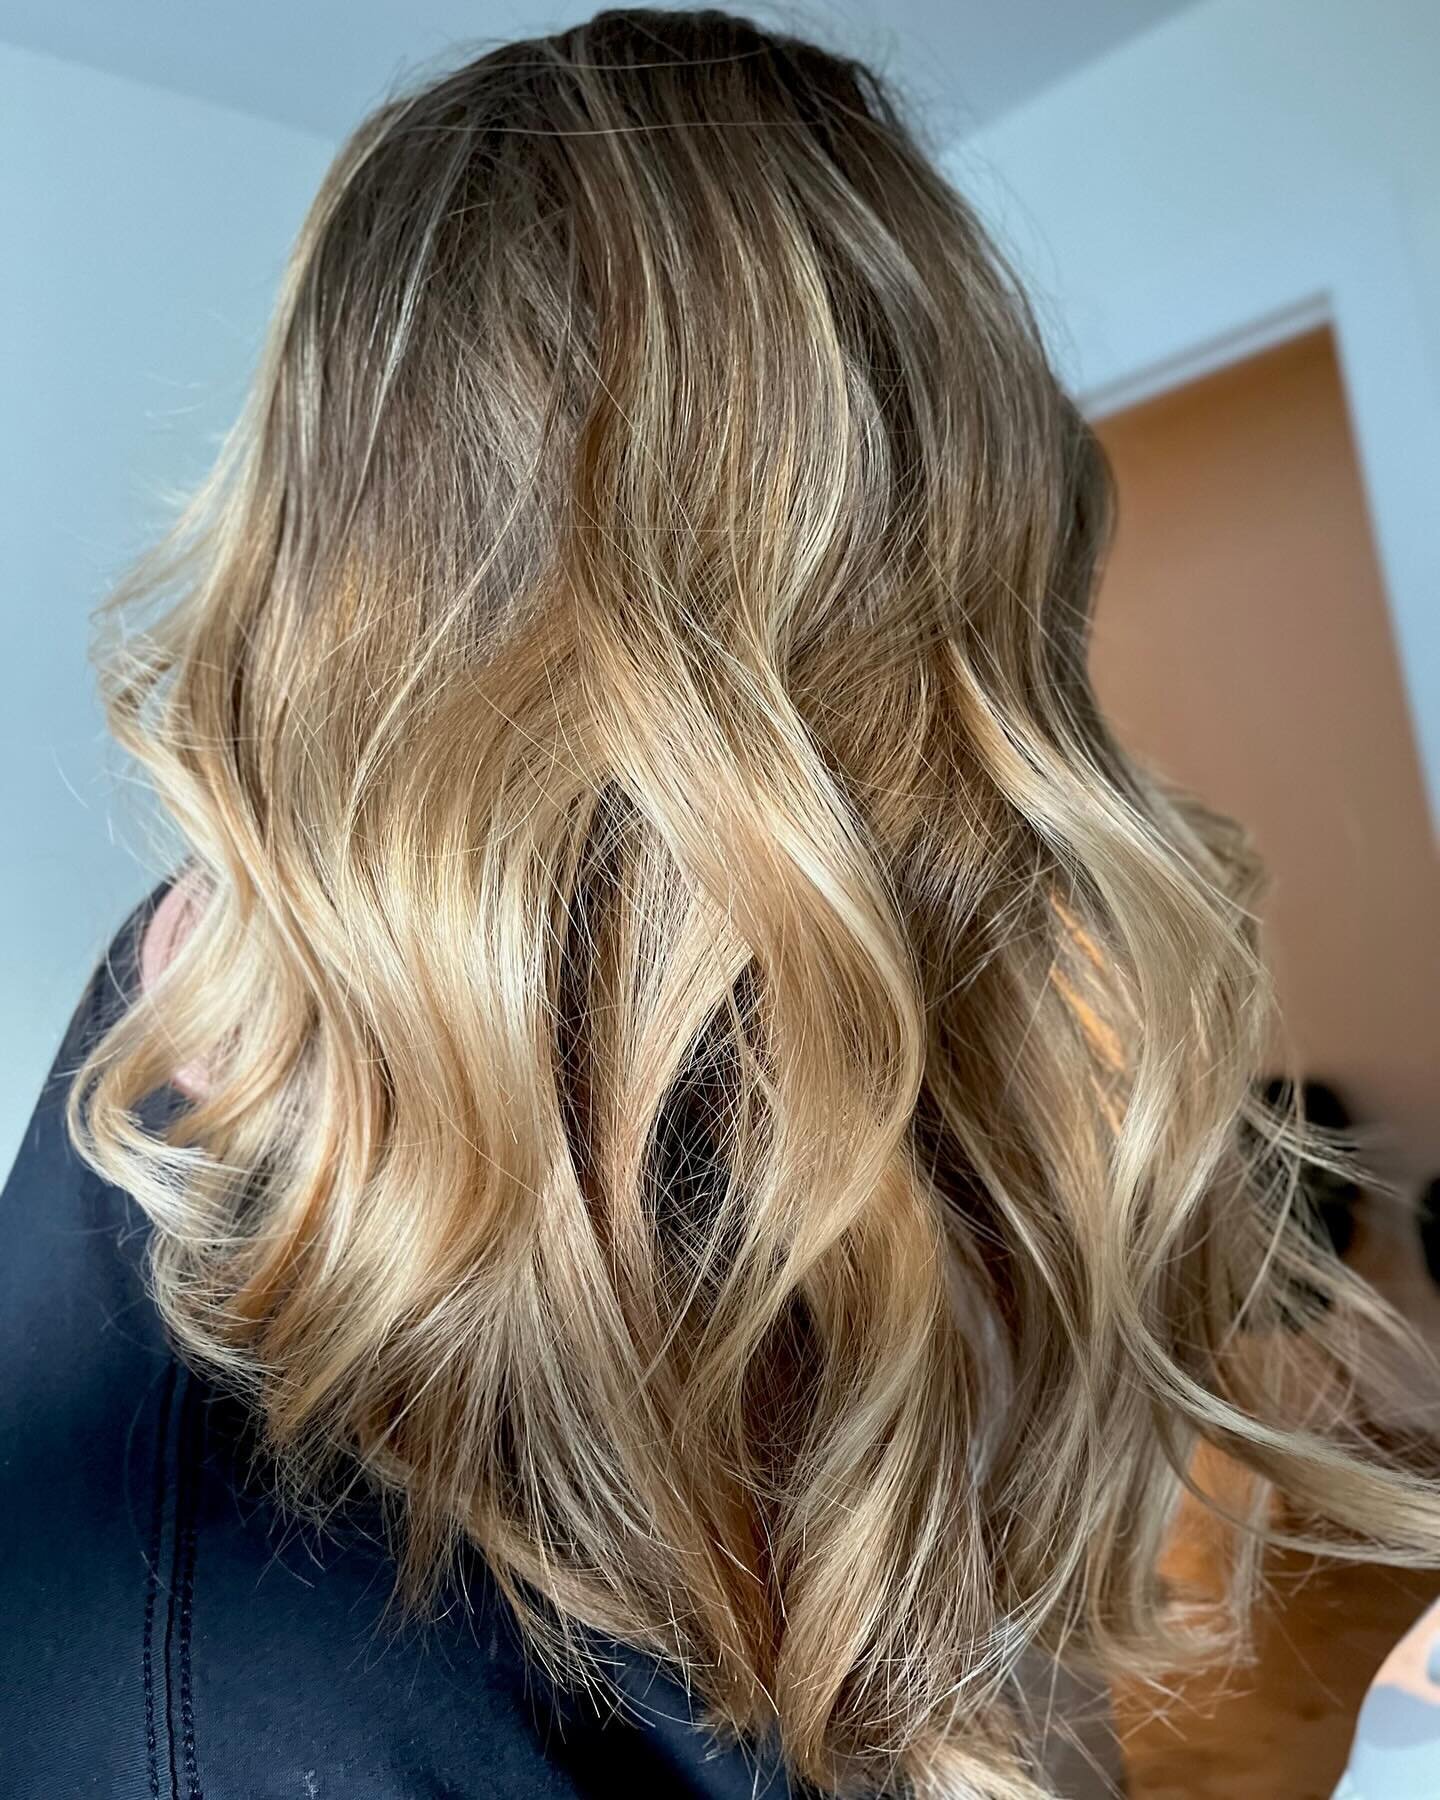 The best hair day.⁠
⁠
Full foils to create a lived in look by @moxiemiller_debbieblonding for stylist @moxiemiller_lauren. Stunning loose @ergostylingtools curls show of the dimension of her color.⁠
⁠
Make sure to secure your April appointment and #s